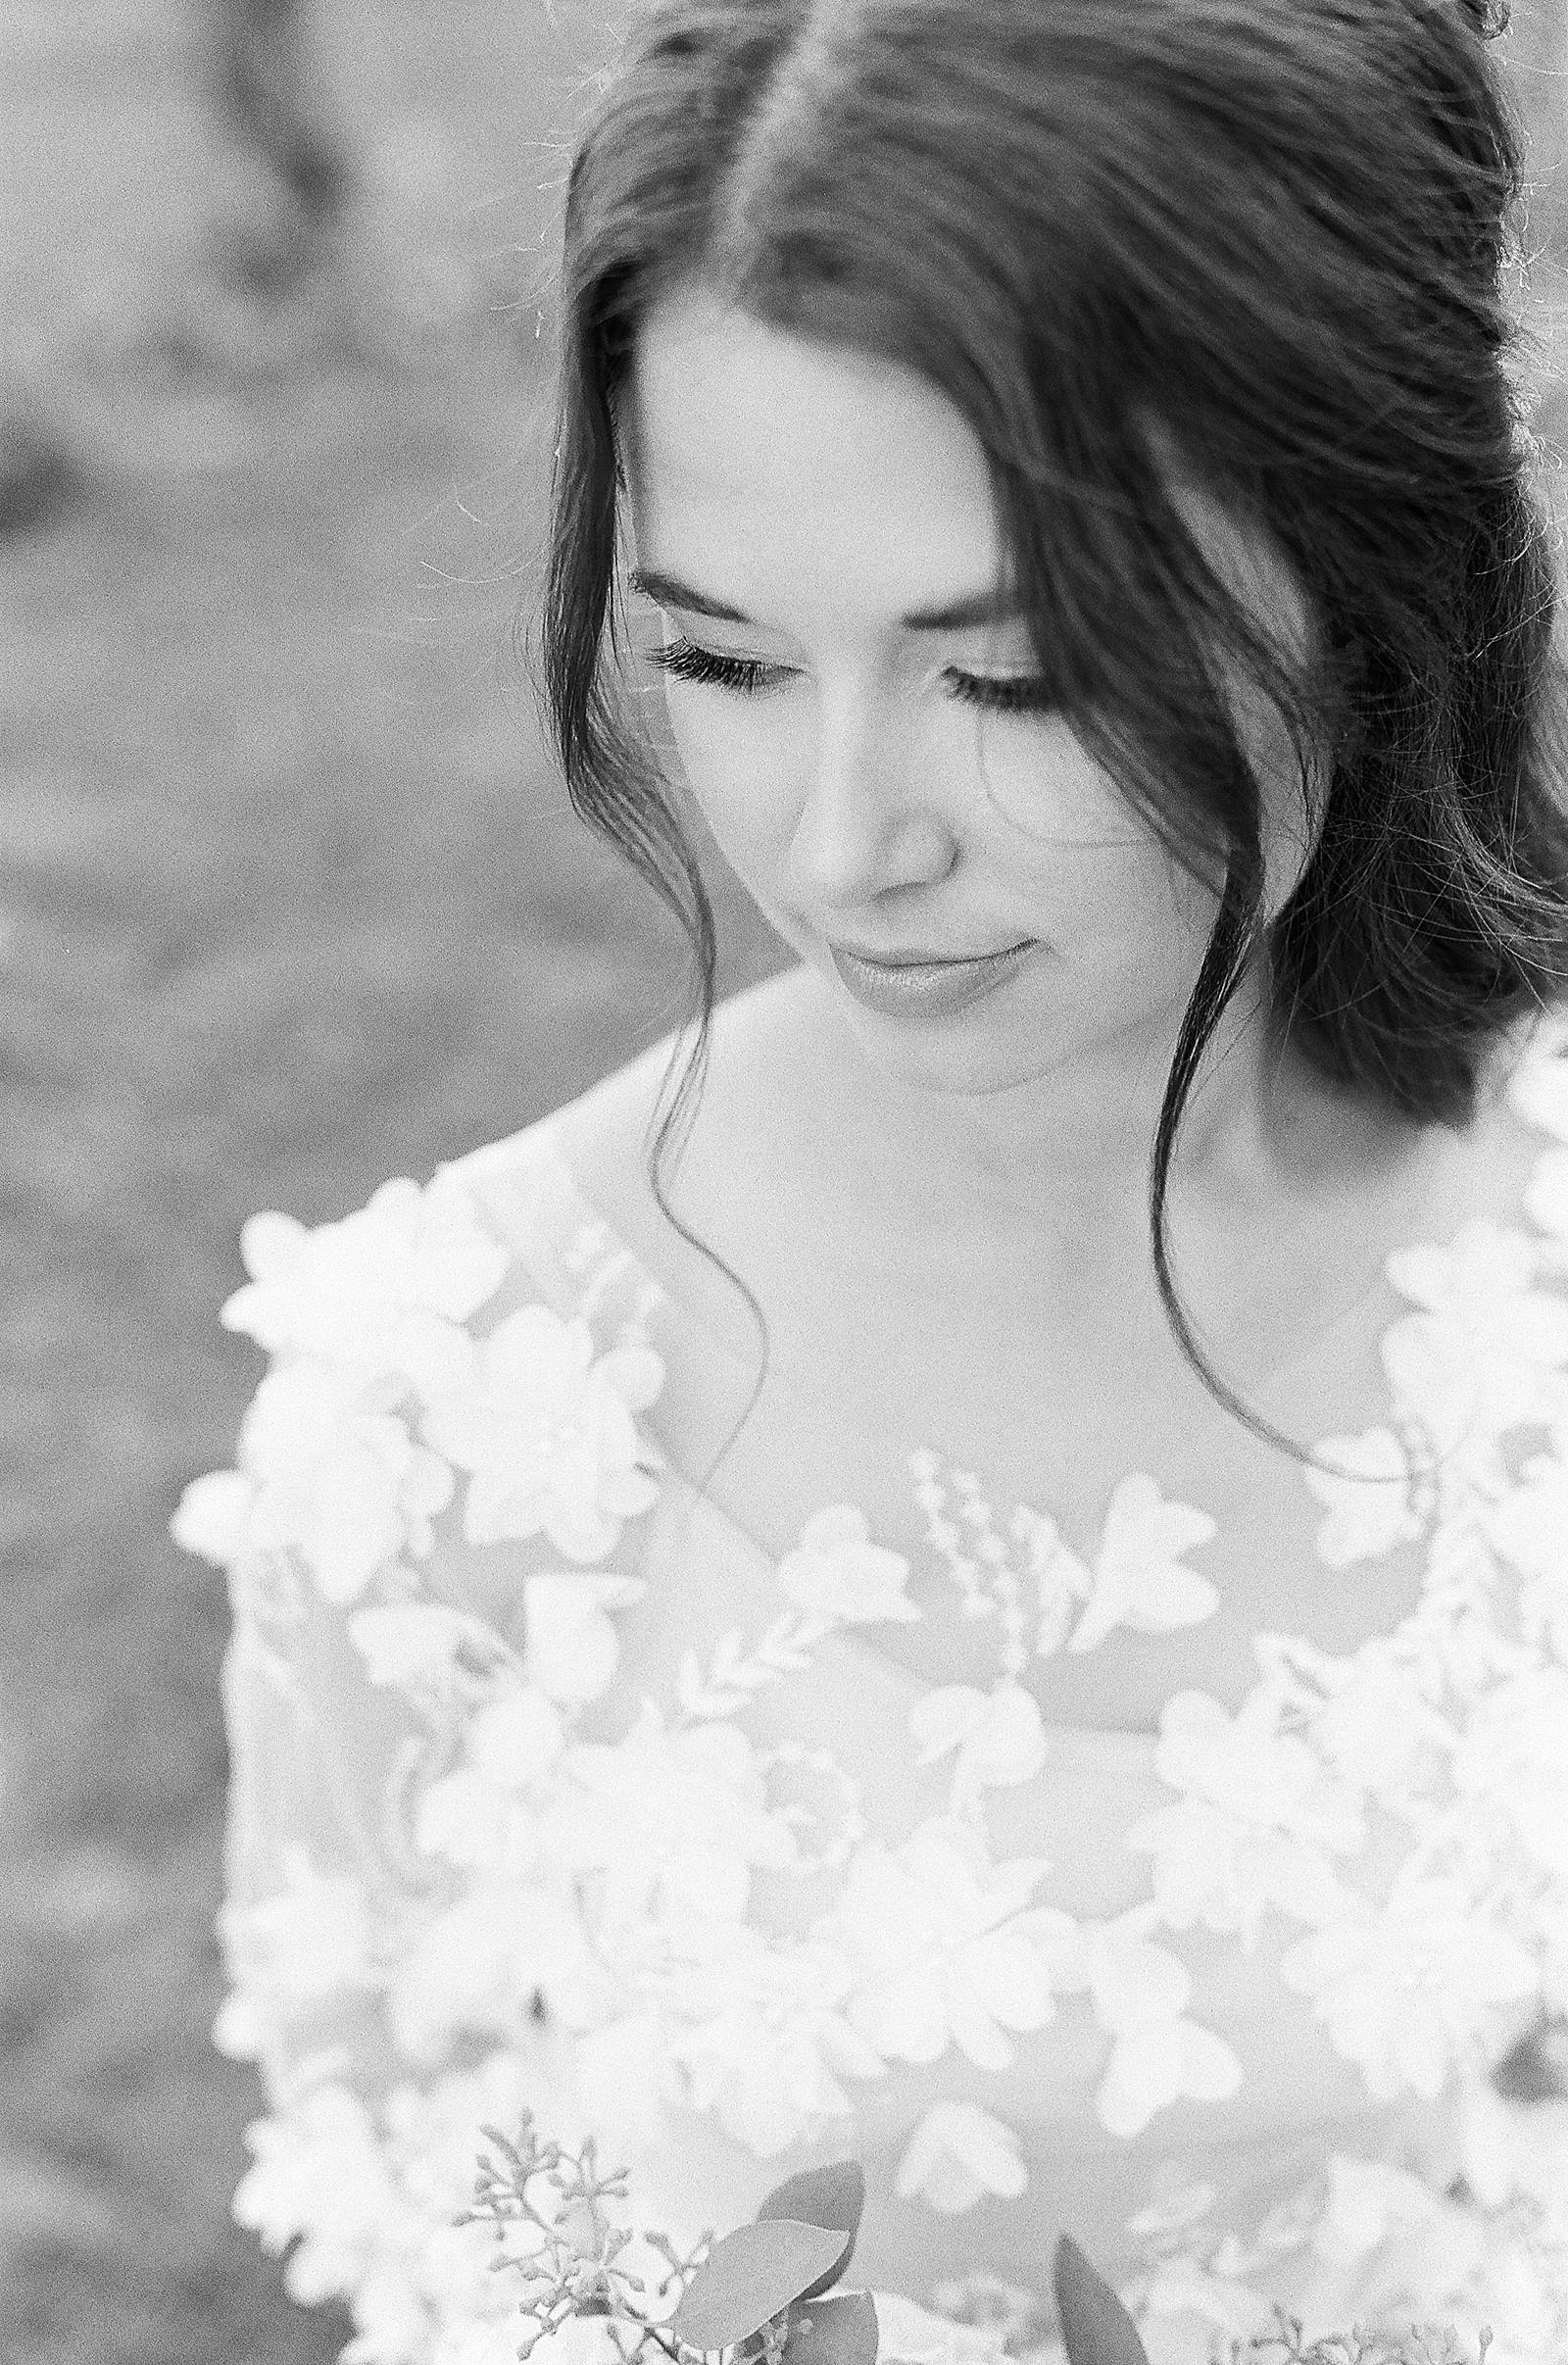 Asheville Wedding Photographer Black and White of Bride Looking Down Photo